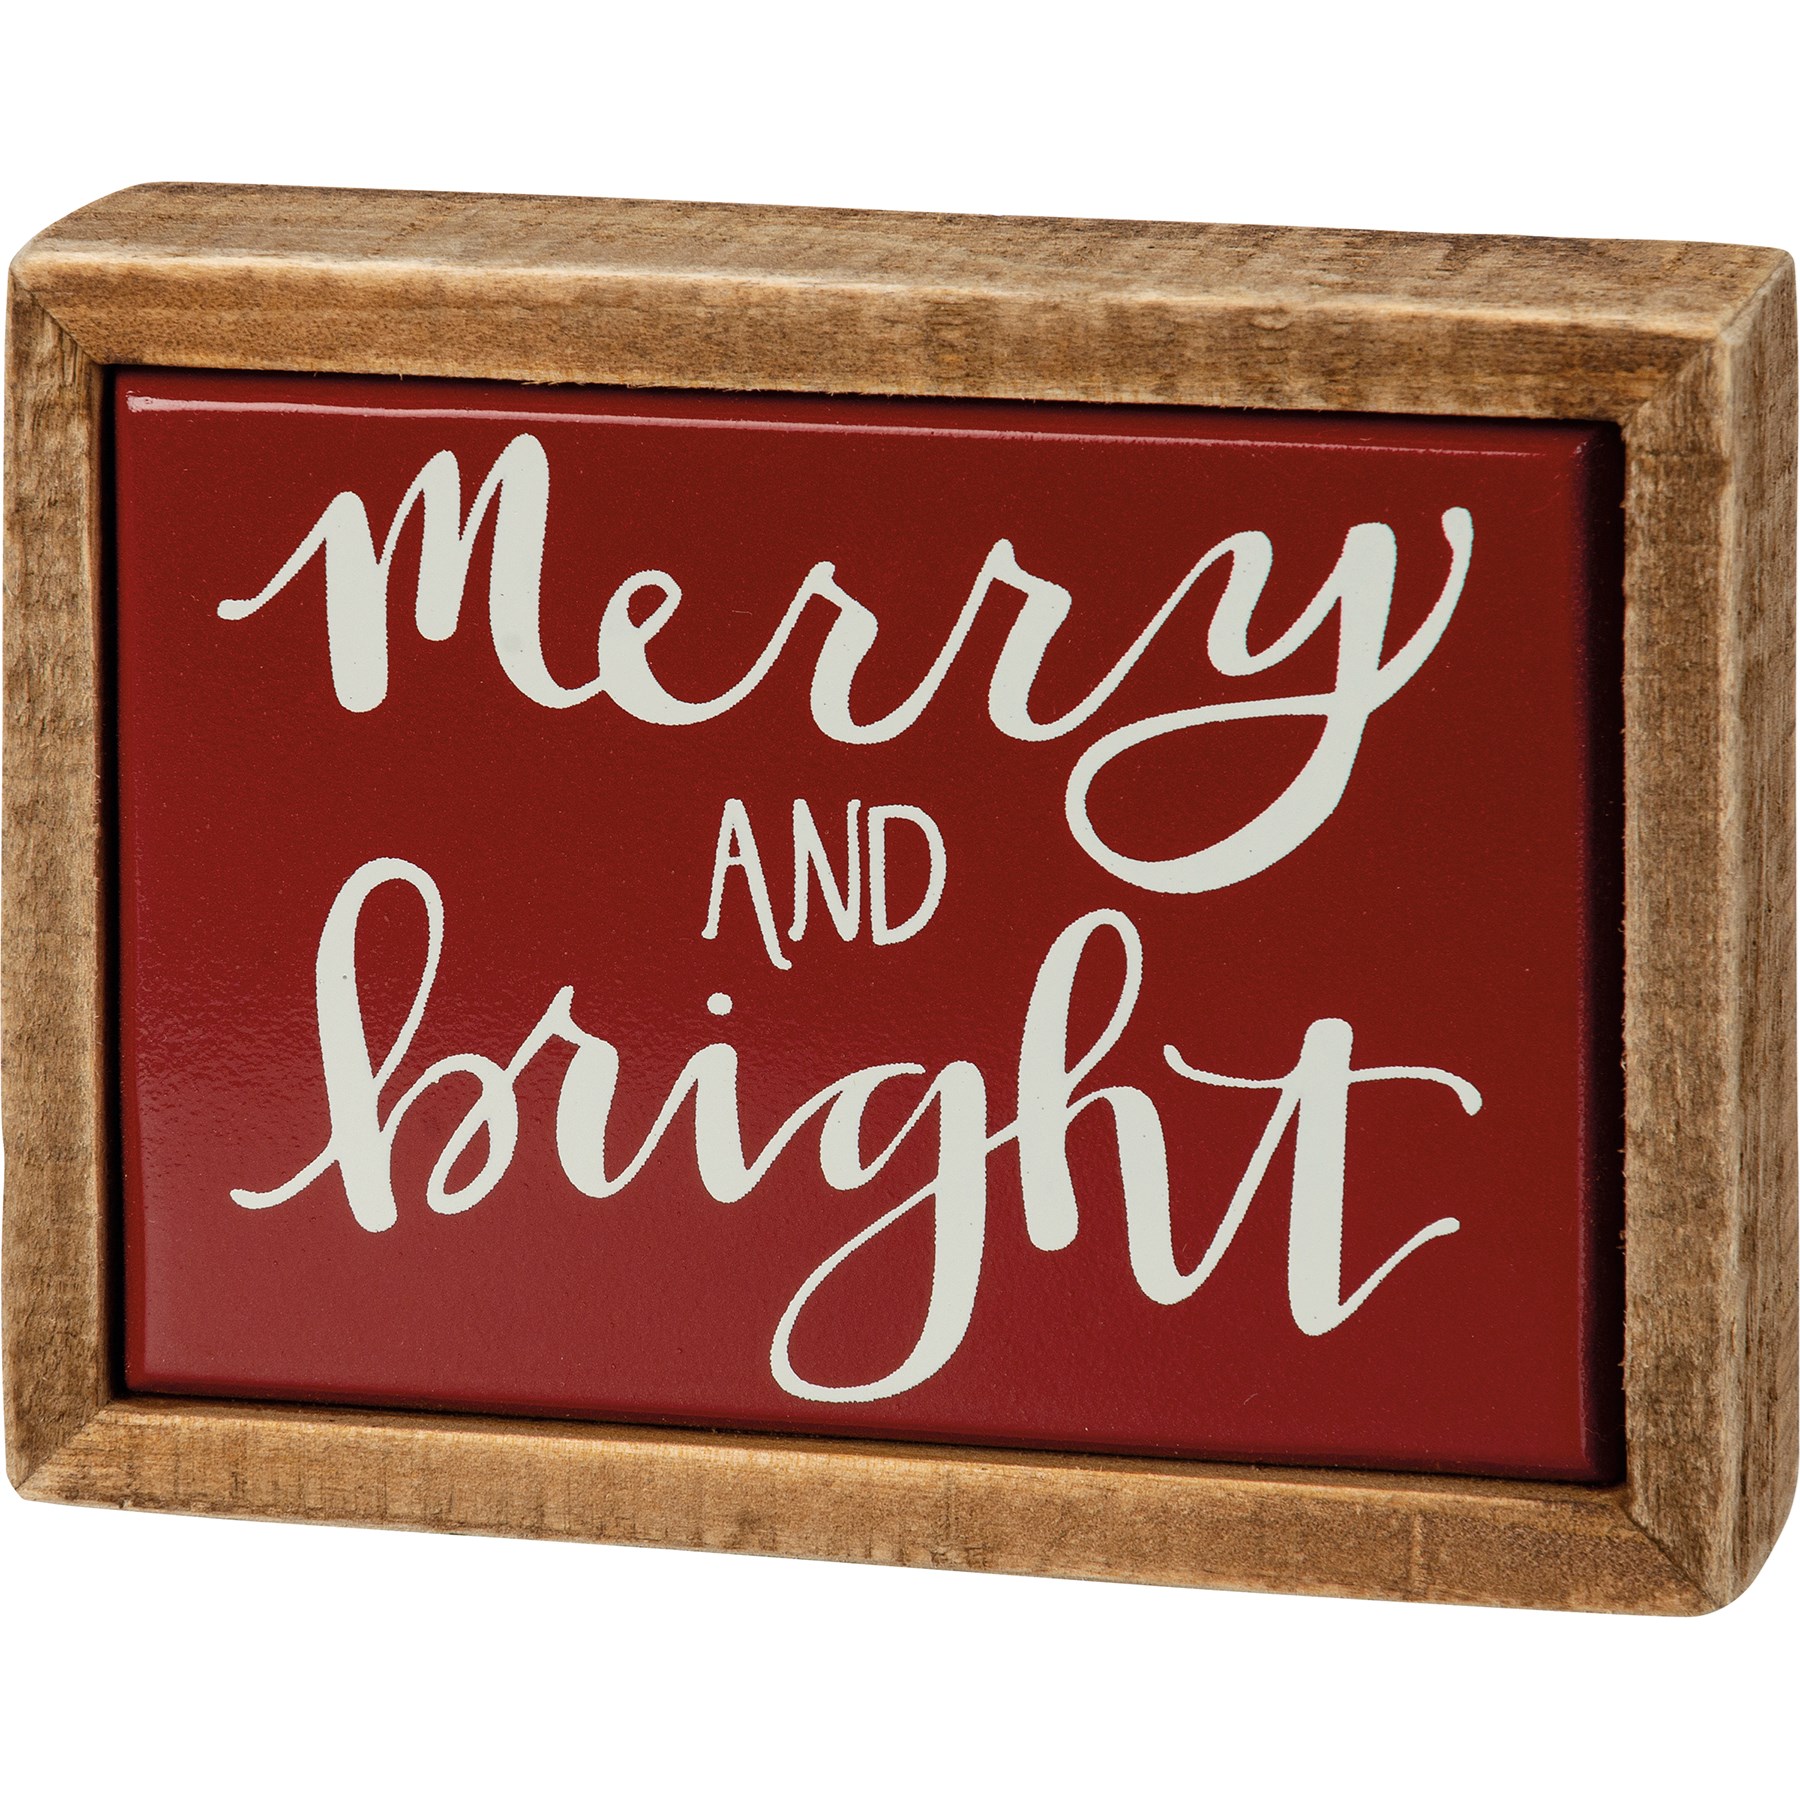 NEW~IS AS MERRY AS WE GET~3"x 4"Shelf LOL Box Sign~Christmas~Primitives By Kathy